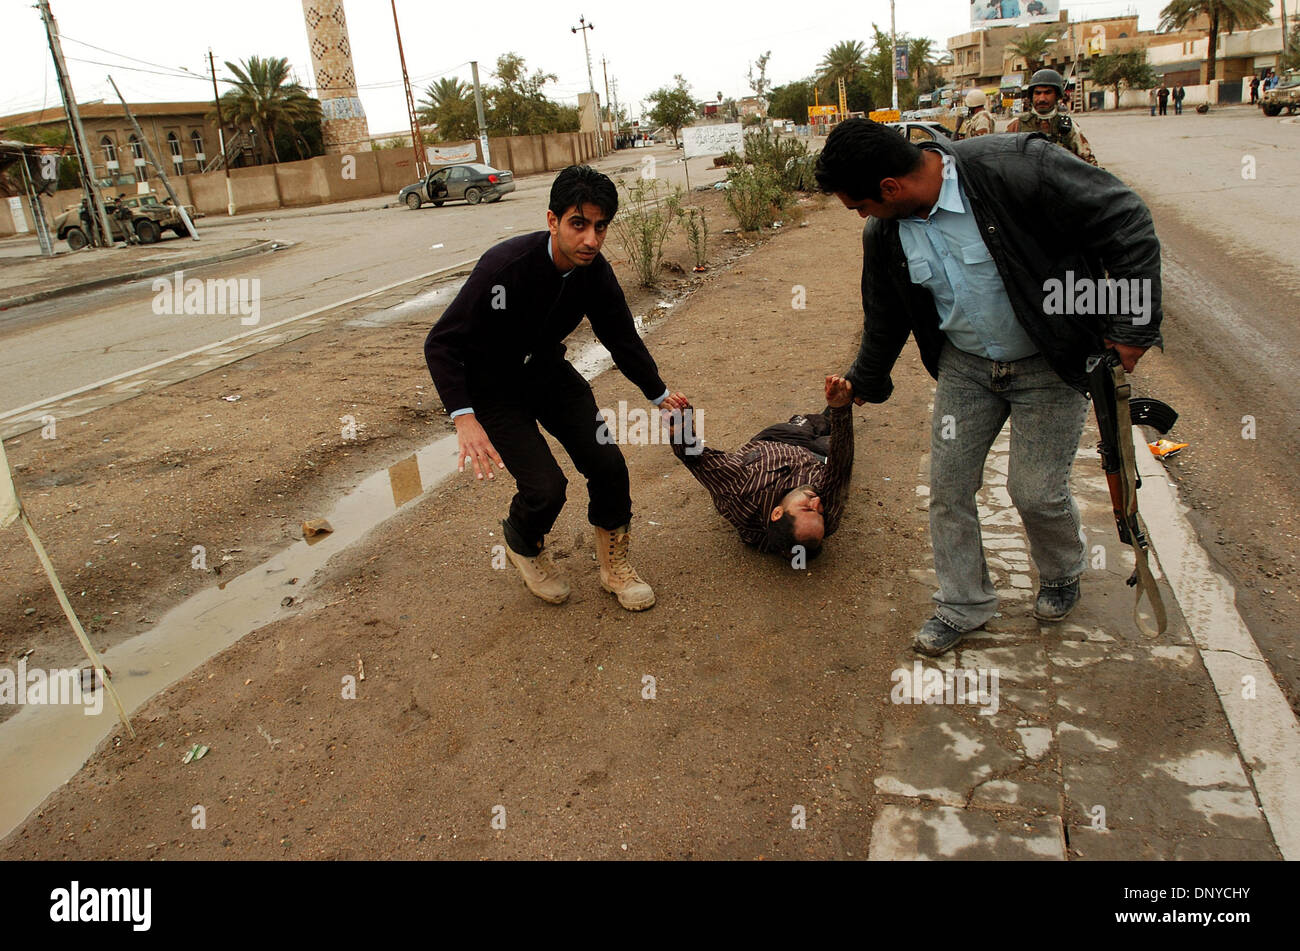 Jan 26, 2006; Abu Ghraib, Baghdad, IRAQ; Iraqi police drag the wounded insurgent away from his smashed up car in Baghdad on Jan. 26, 2006. The insurgent was shot 20 times during a gun battle between American soldiers and a car of four insurgents. Iraqi Ministry of Defense identification cards and drug-filled syringes were found in the car along with four AK-47s, one PKM machine gun Stock Photo